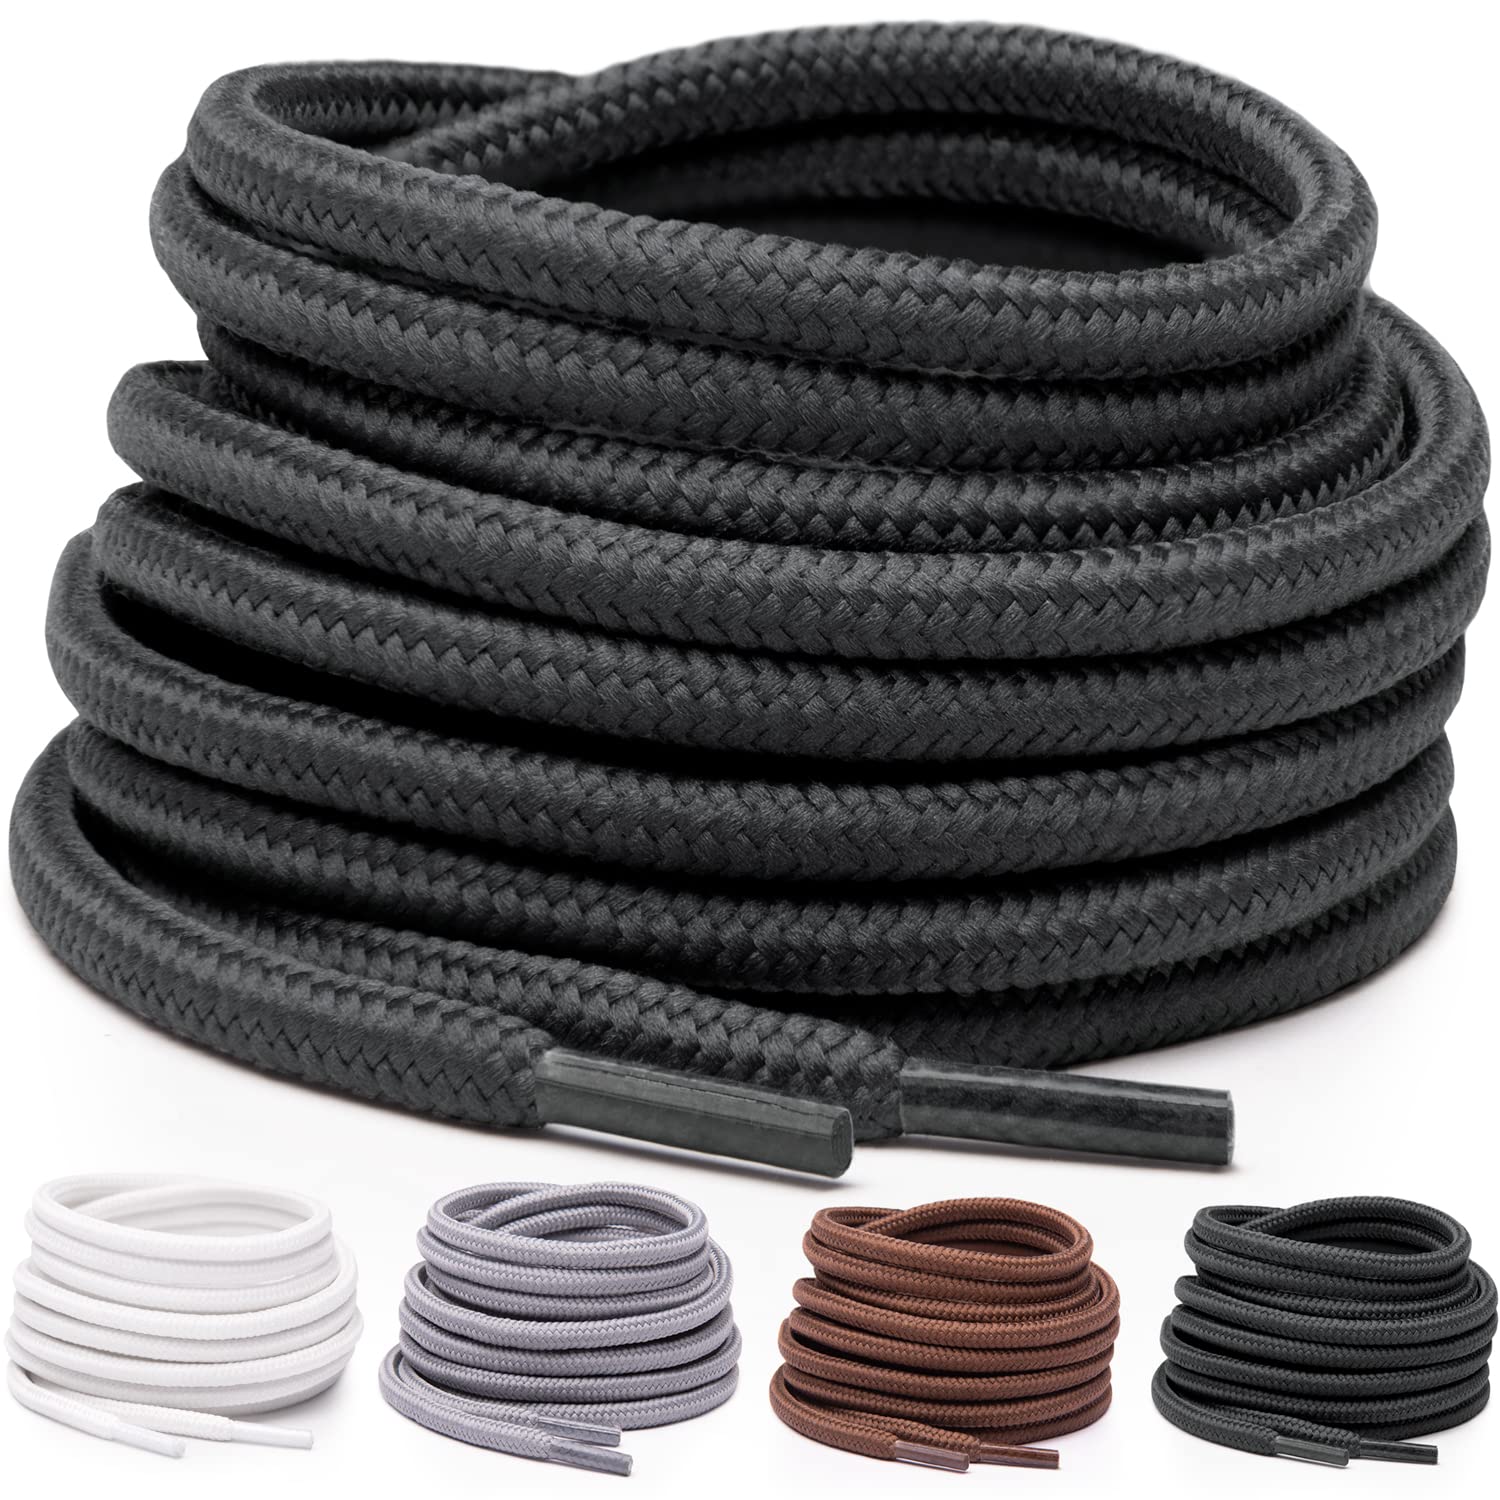 Miscly Round Shoelaces 1 Pair] 532 Thick - For Shoes, Sneakers  Boots (36, Black)